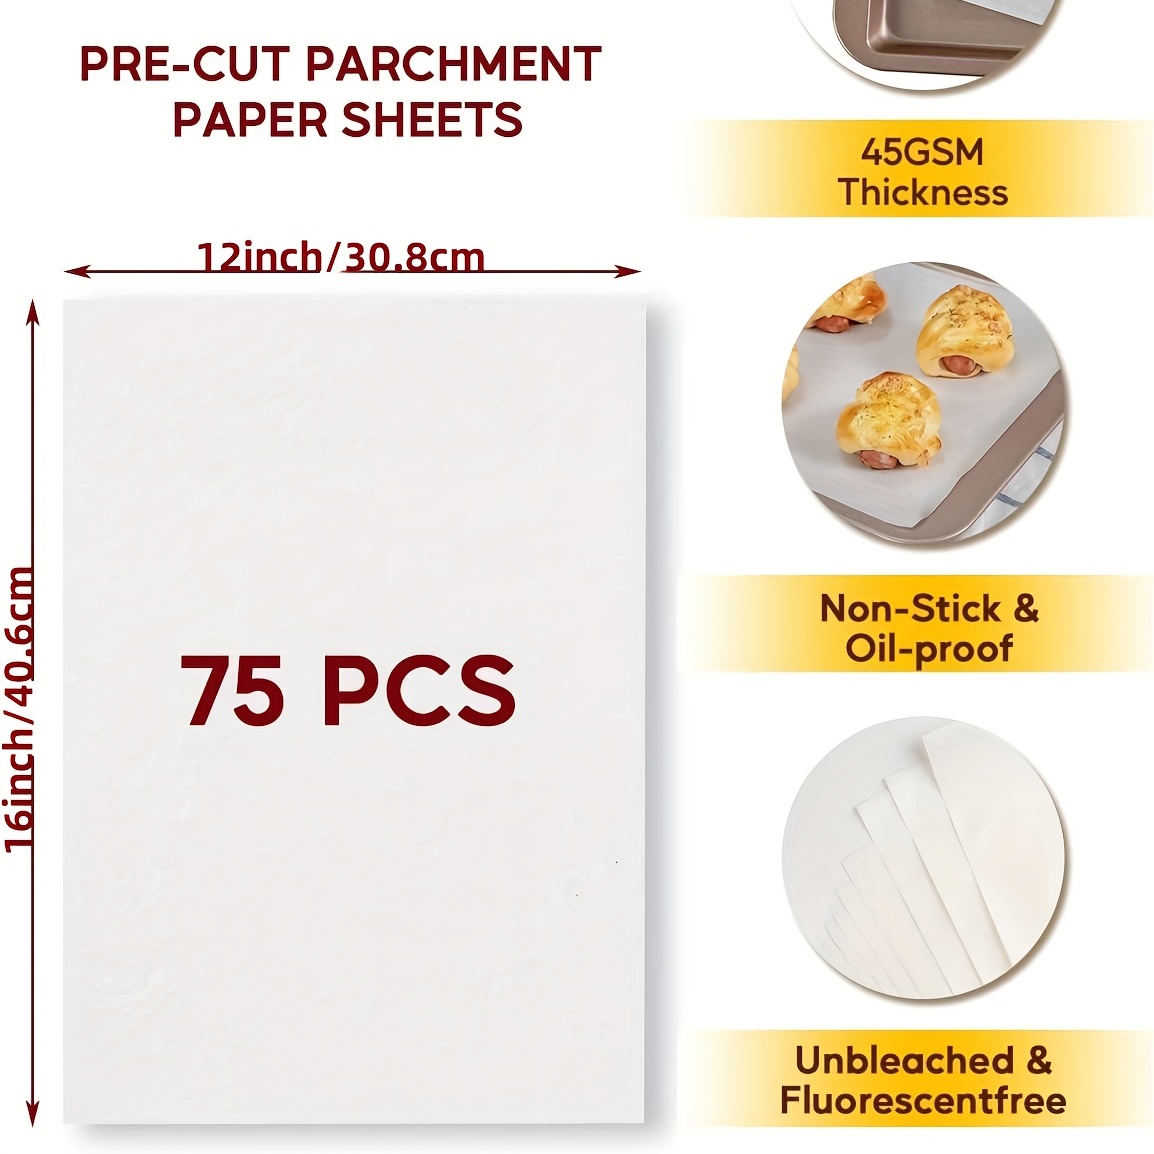 Heavy Duty Parchment Paper Sheets, Precut Parchment Paper for Quarter Sheet Pans Liners, Baking Cookies, Bread, Meat, Pizza, Toaster Oven, Size: 11.8